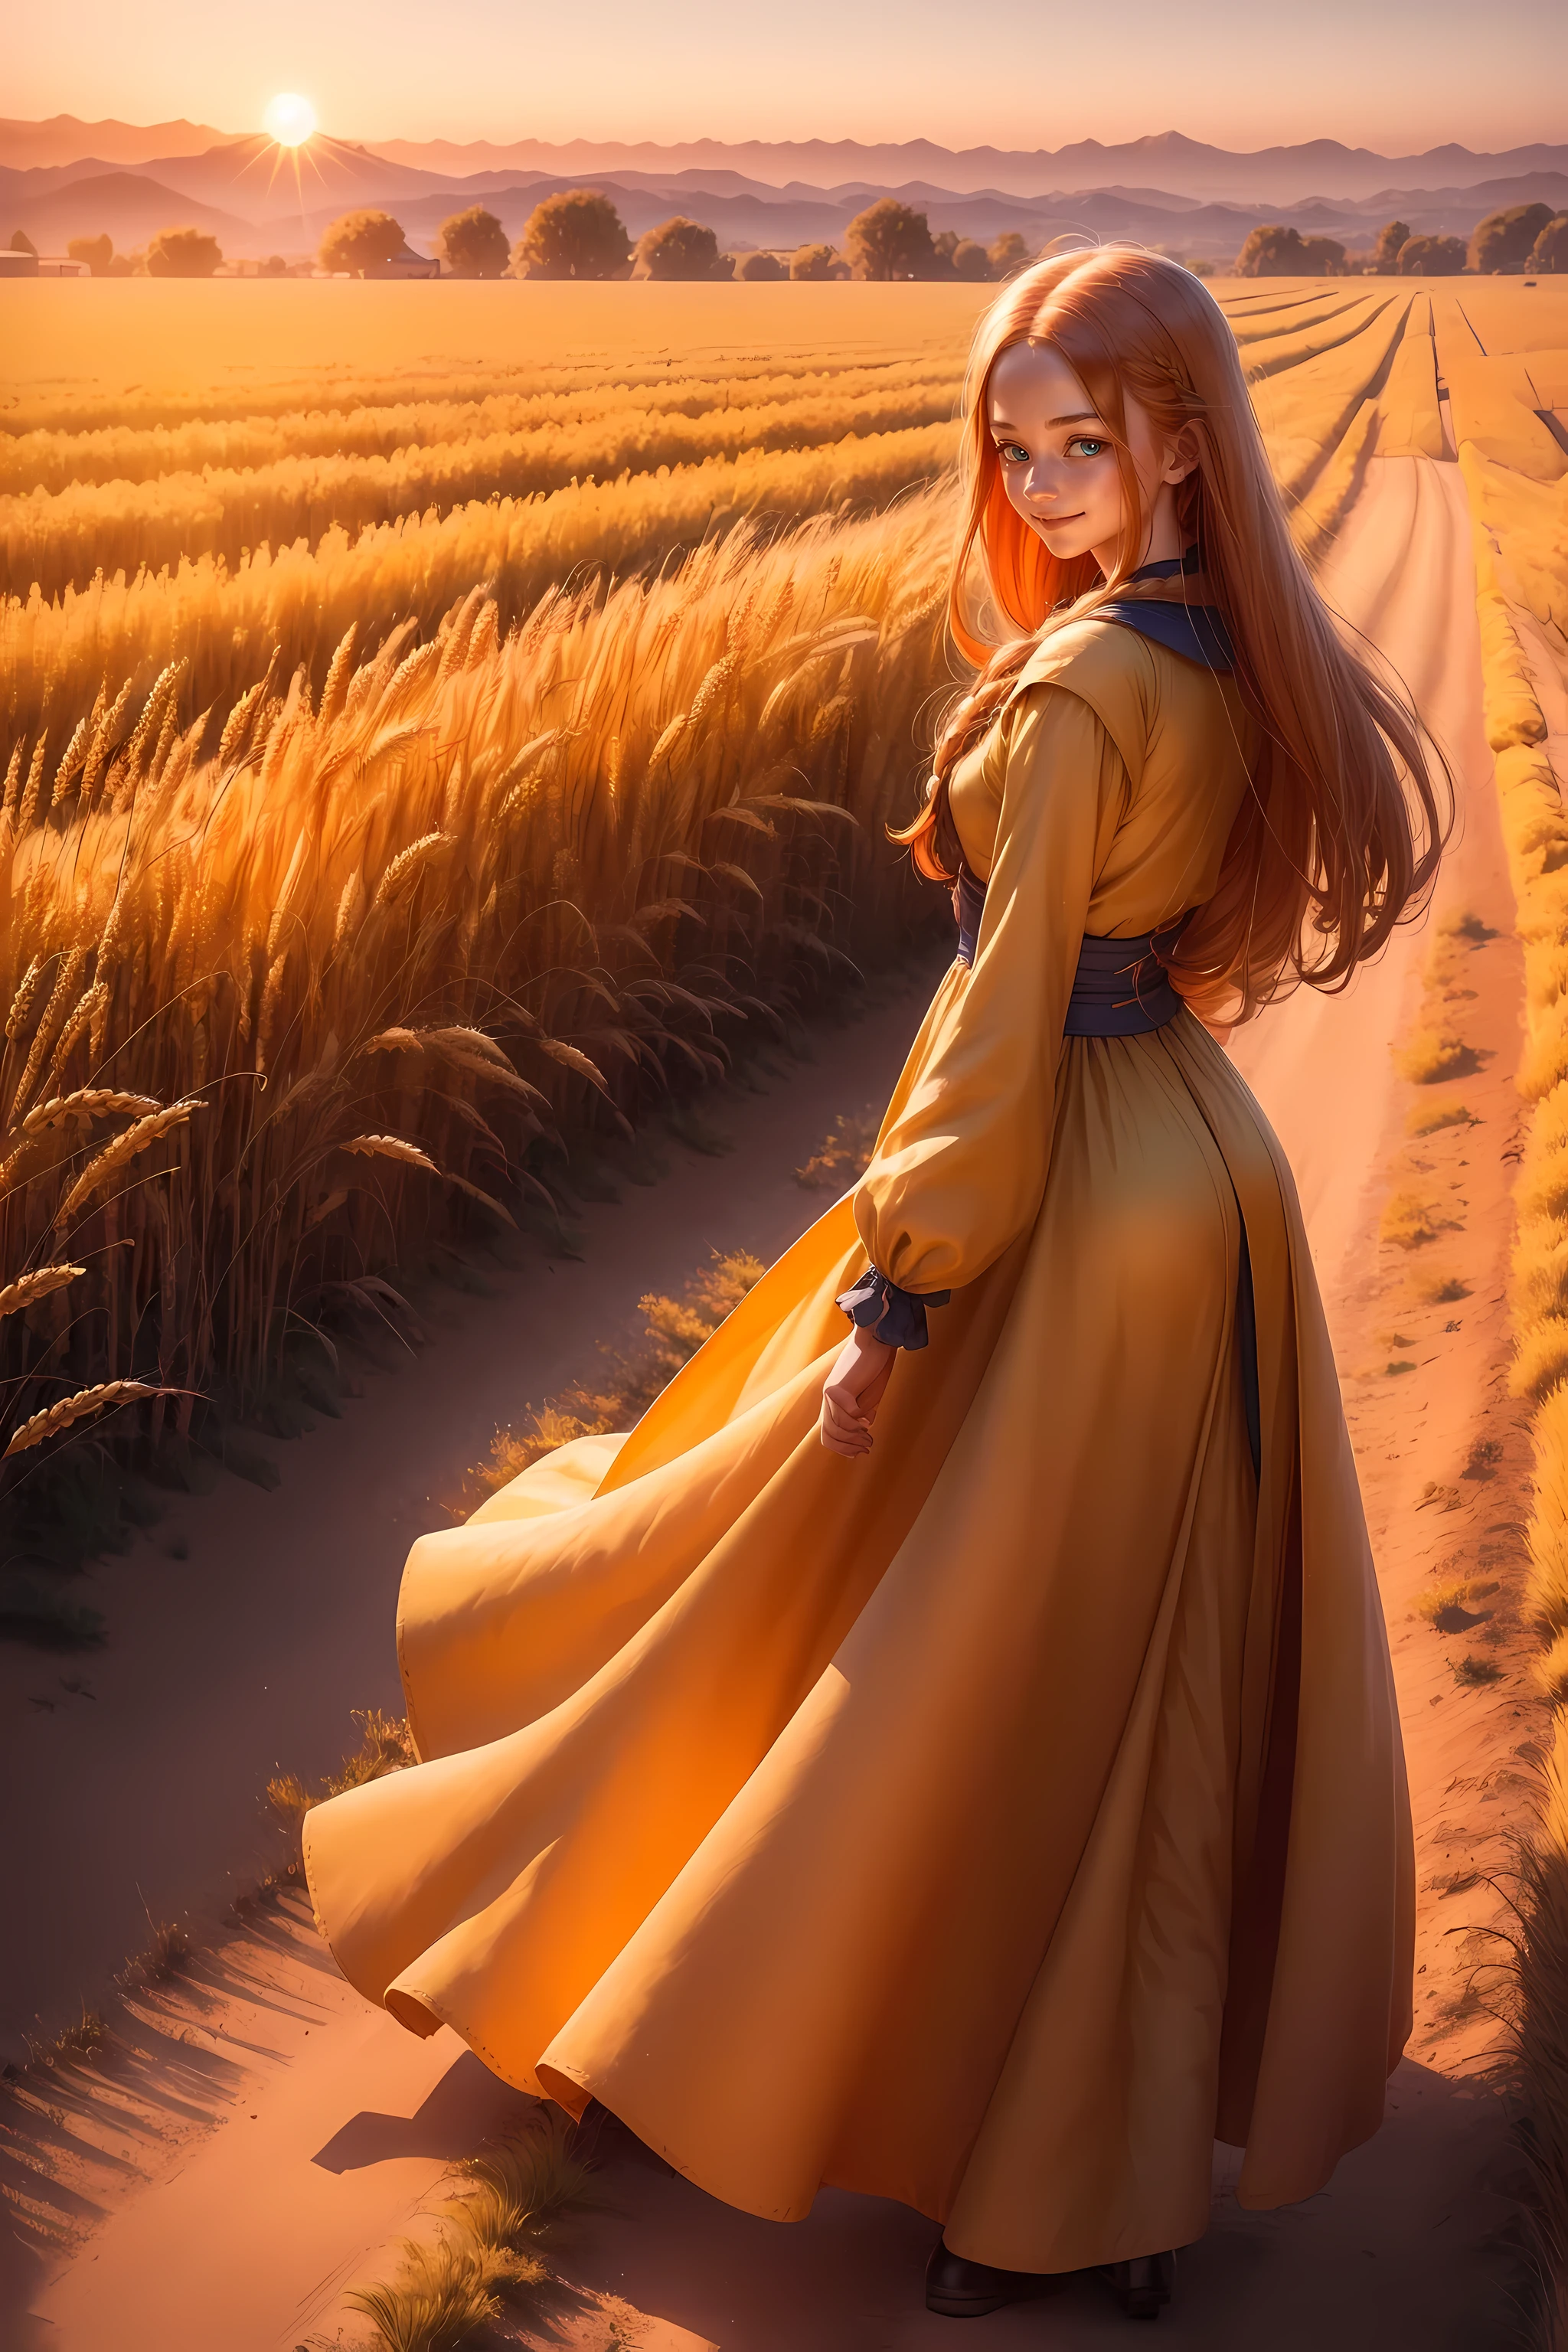 1 girl, alone, orange long hair, running, (tall wheat fields), turn around, emerald eyes, blue dress, middle Ages, middle ages clothing, long sleeve sunset, light from behind, shadows on characters, Smile, laughter, (blue sky), Against the background of wheat, stand far away, looking at the audience, full length